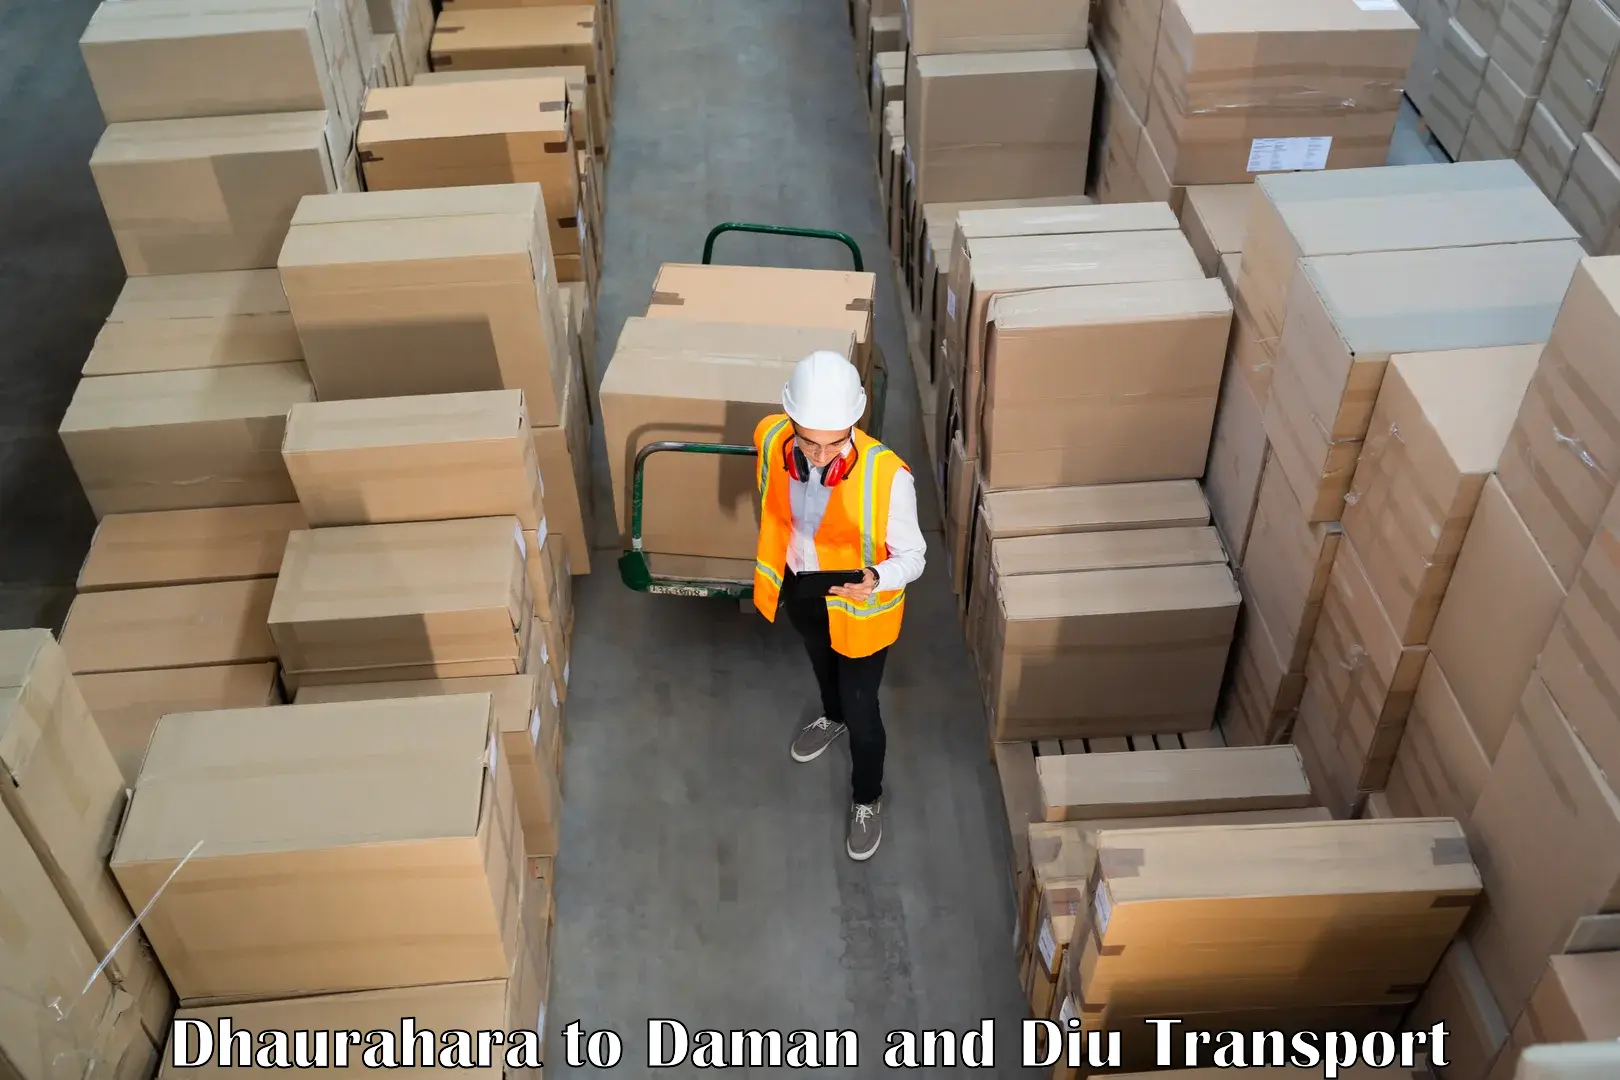 Interstate transport services Dhaurahara to Daman and Diu